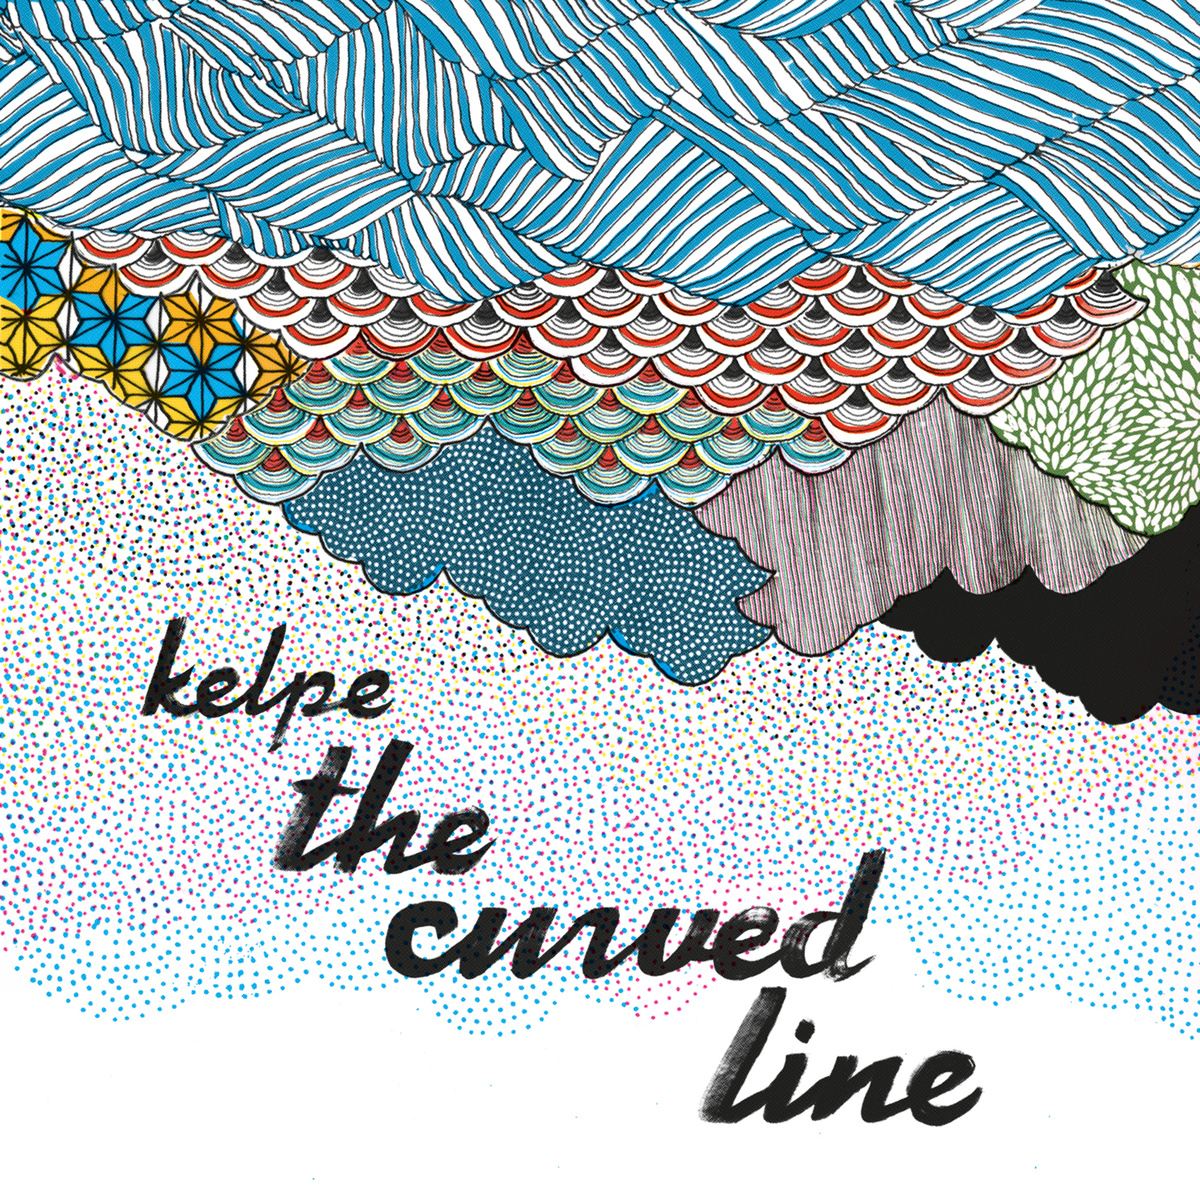 Kelpe - The Curved Line